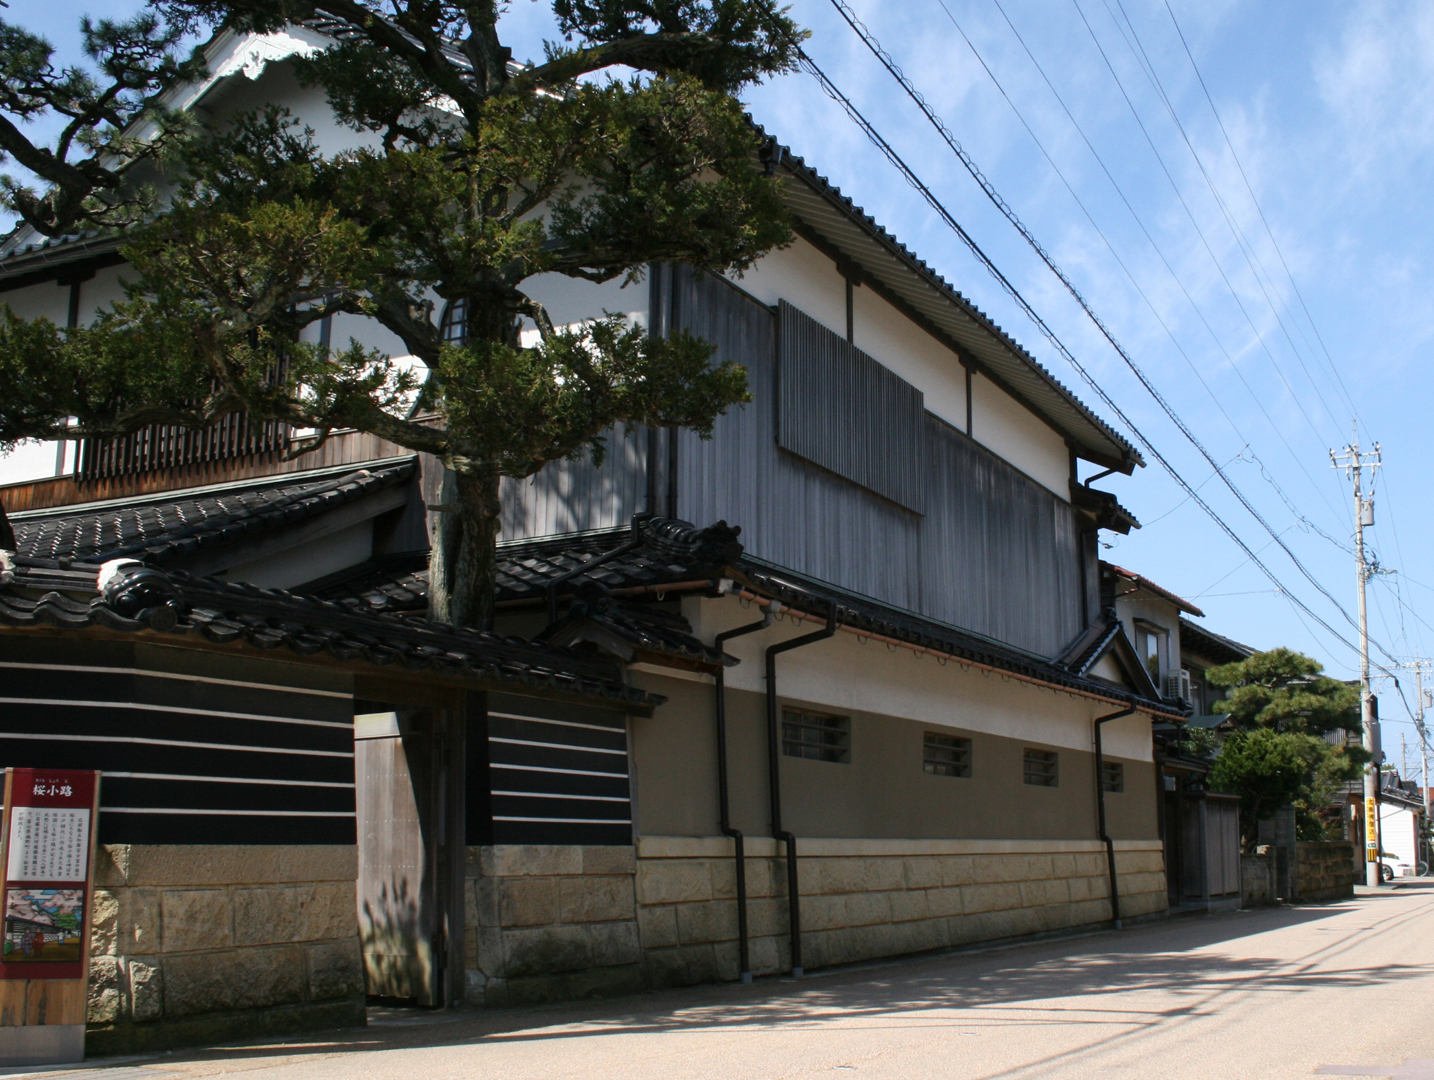 Townscape of Mikawa